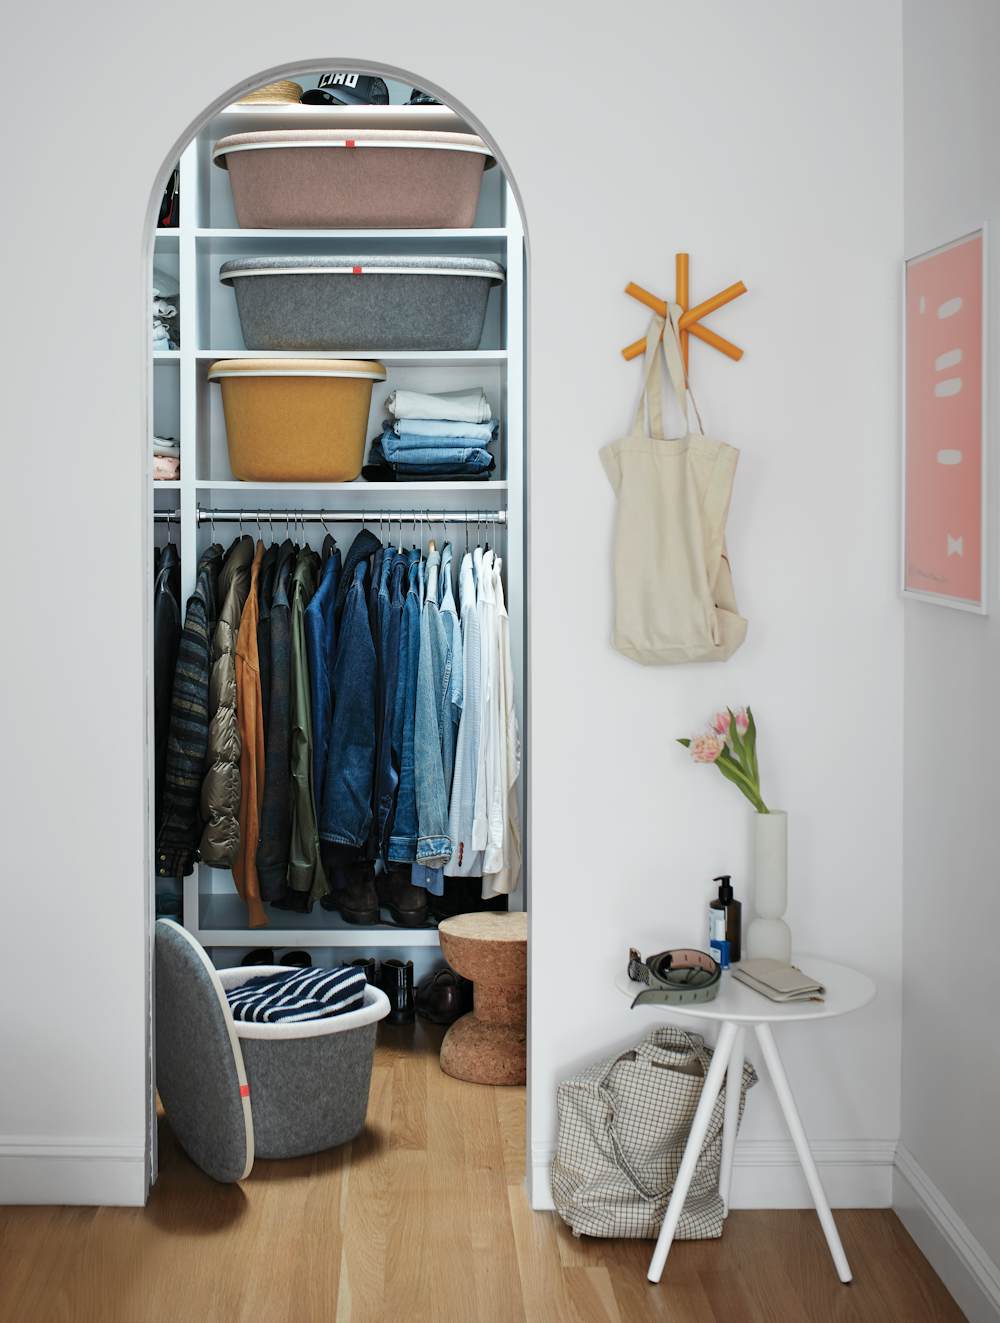 Stow Storage Bin in a bedroom closet setting